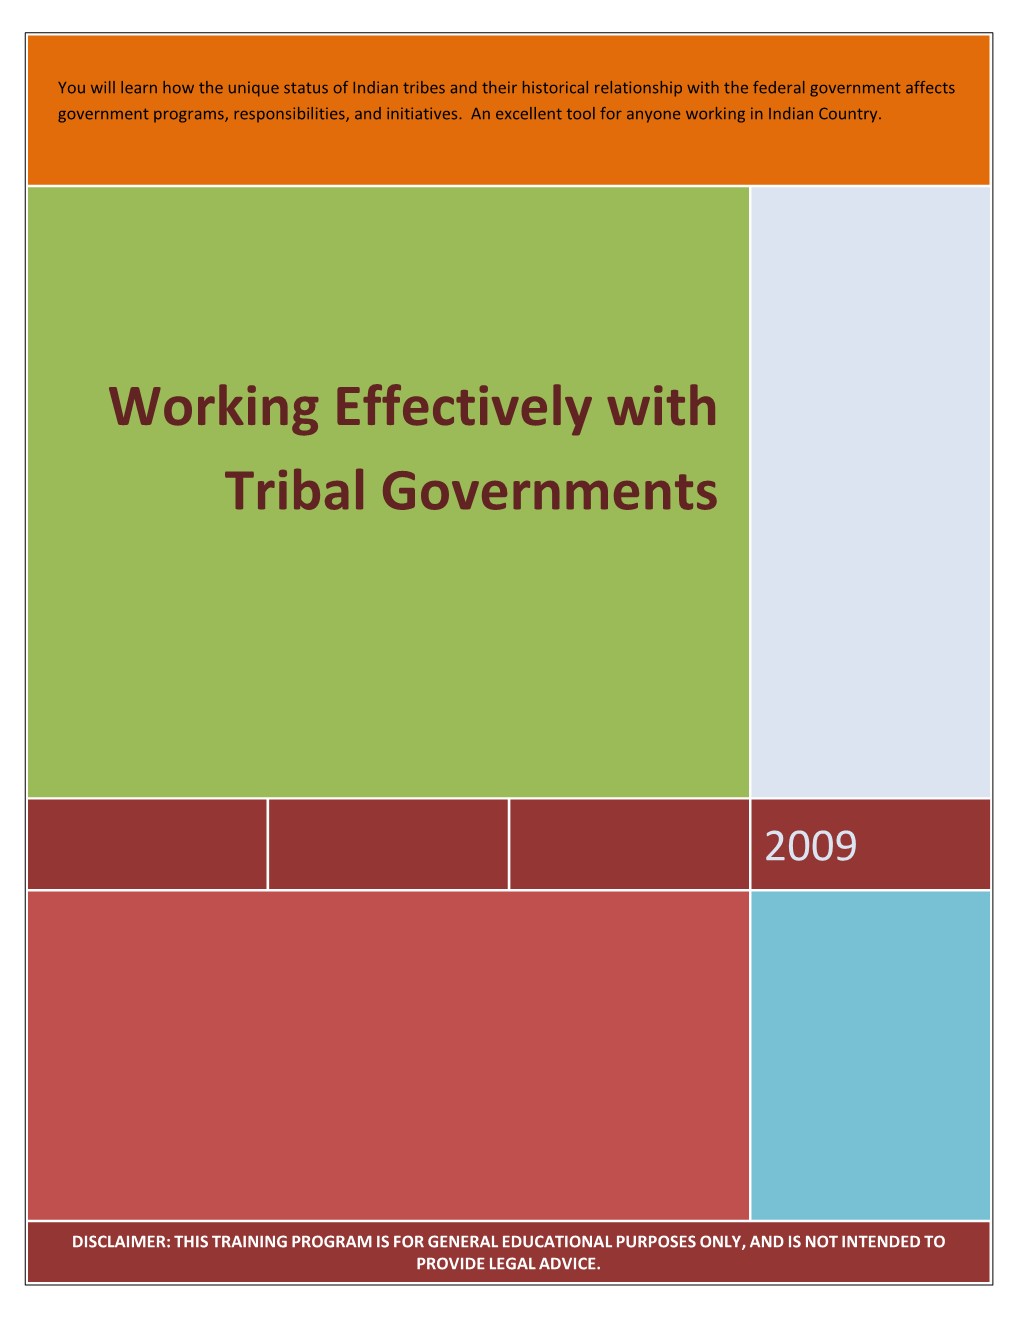 Working Effectively with Tribal Governments